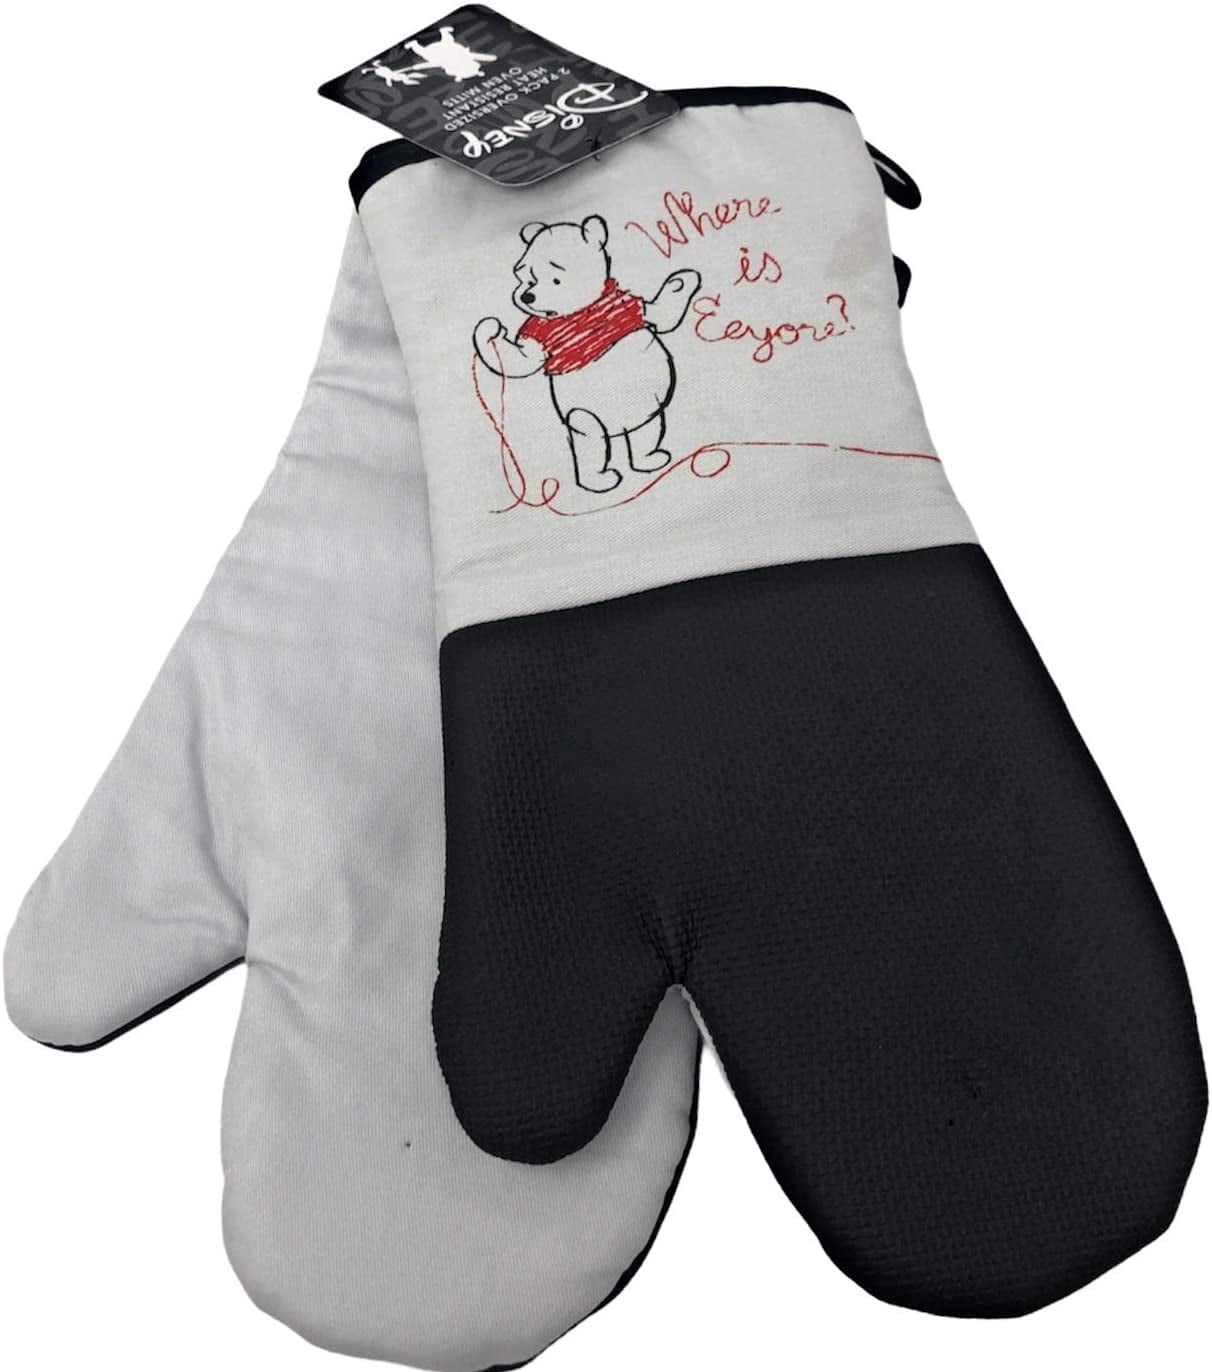 13-Inch Kay Dee Designs Cotton Oven Mitt Queen of Everything 